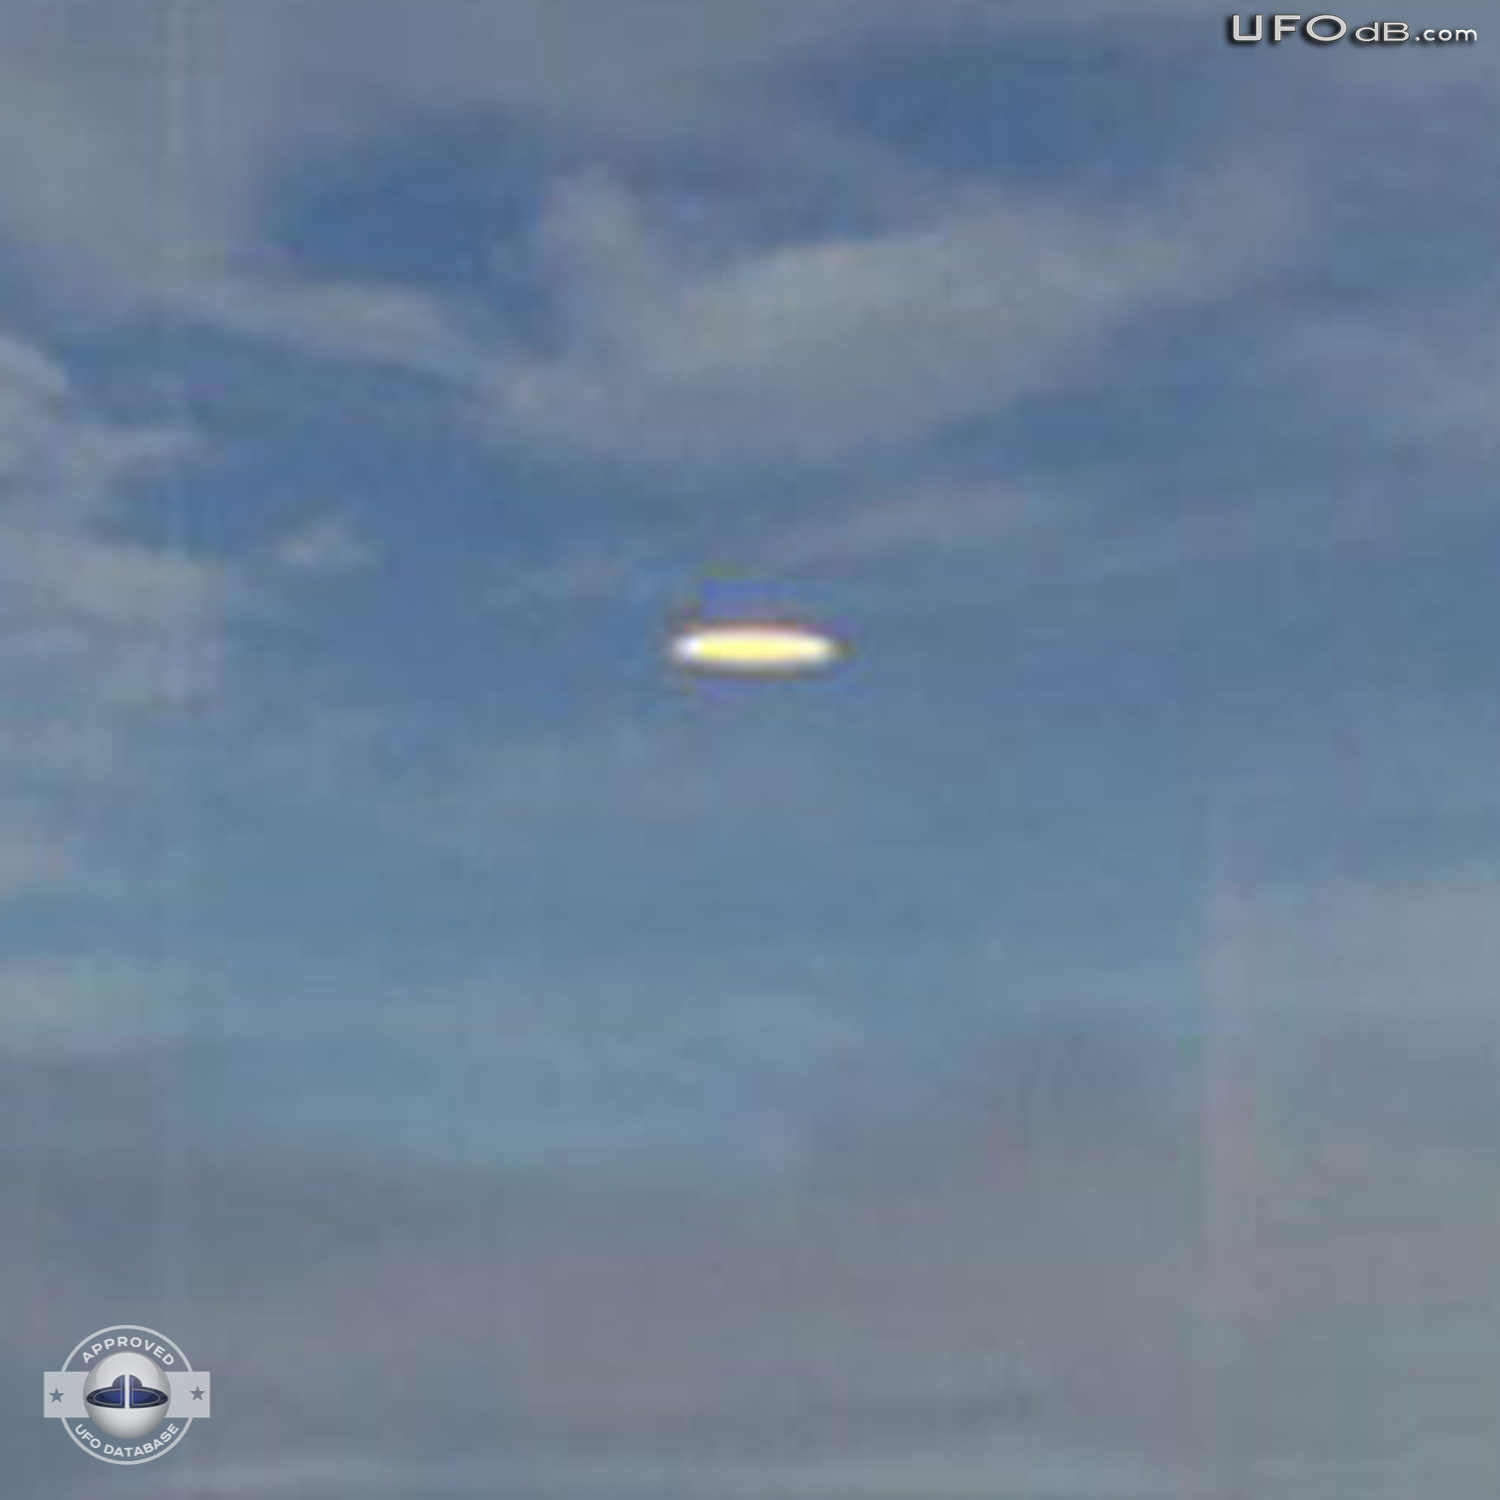 Tourist see UFO from The Stratosphere Hotel, Las Vegas | April 16 2011 UFO Picture #266-4